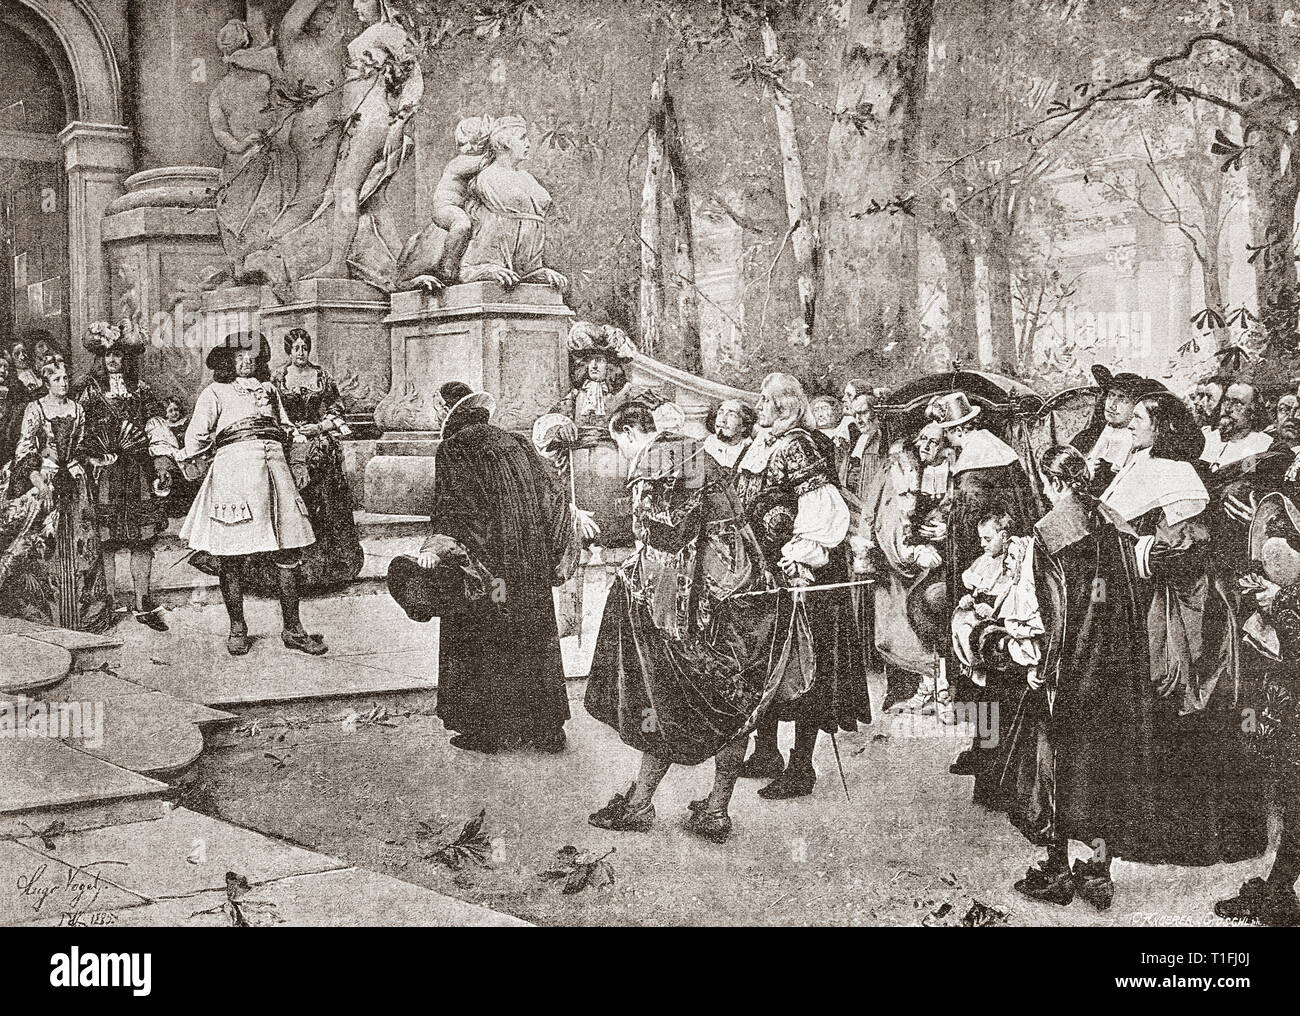 Reception of the French Calvinist Protestant refugees (Huguenots) by the Great Elector in Potsdam Castle, 1685.  French Protestants fleeing their country after the abolishment of the Edict of Nantes, seen here during the audience at the court of Frederick William (1640-1688), Elector of Brandenburg.  From Ilustracion Artistica, published 1887. Stock Photo